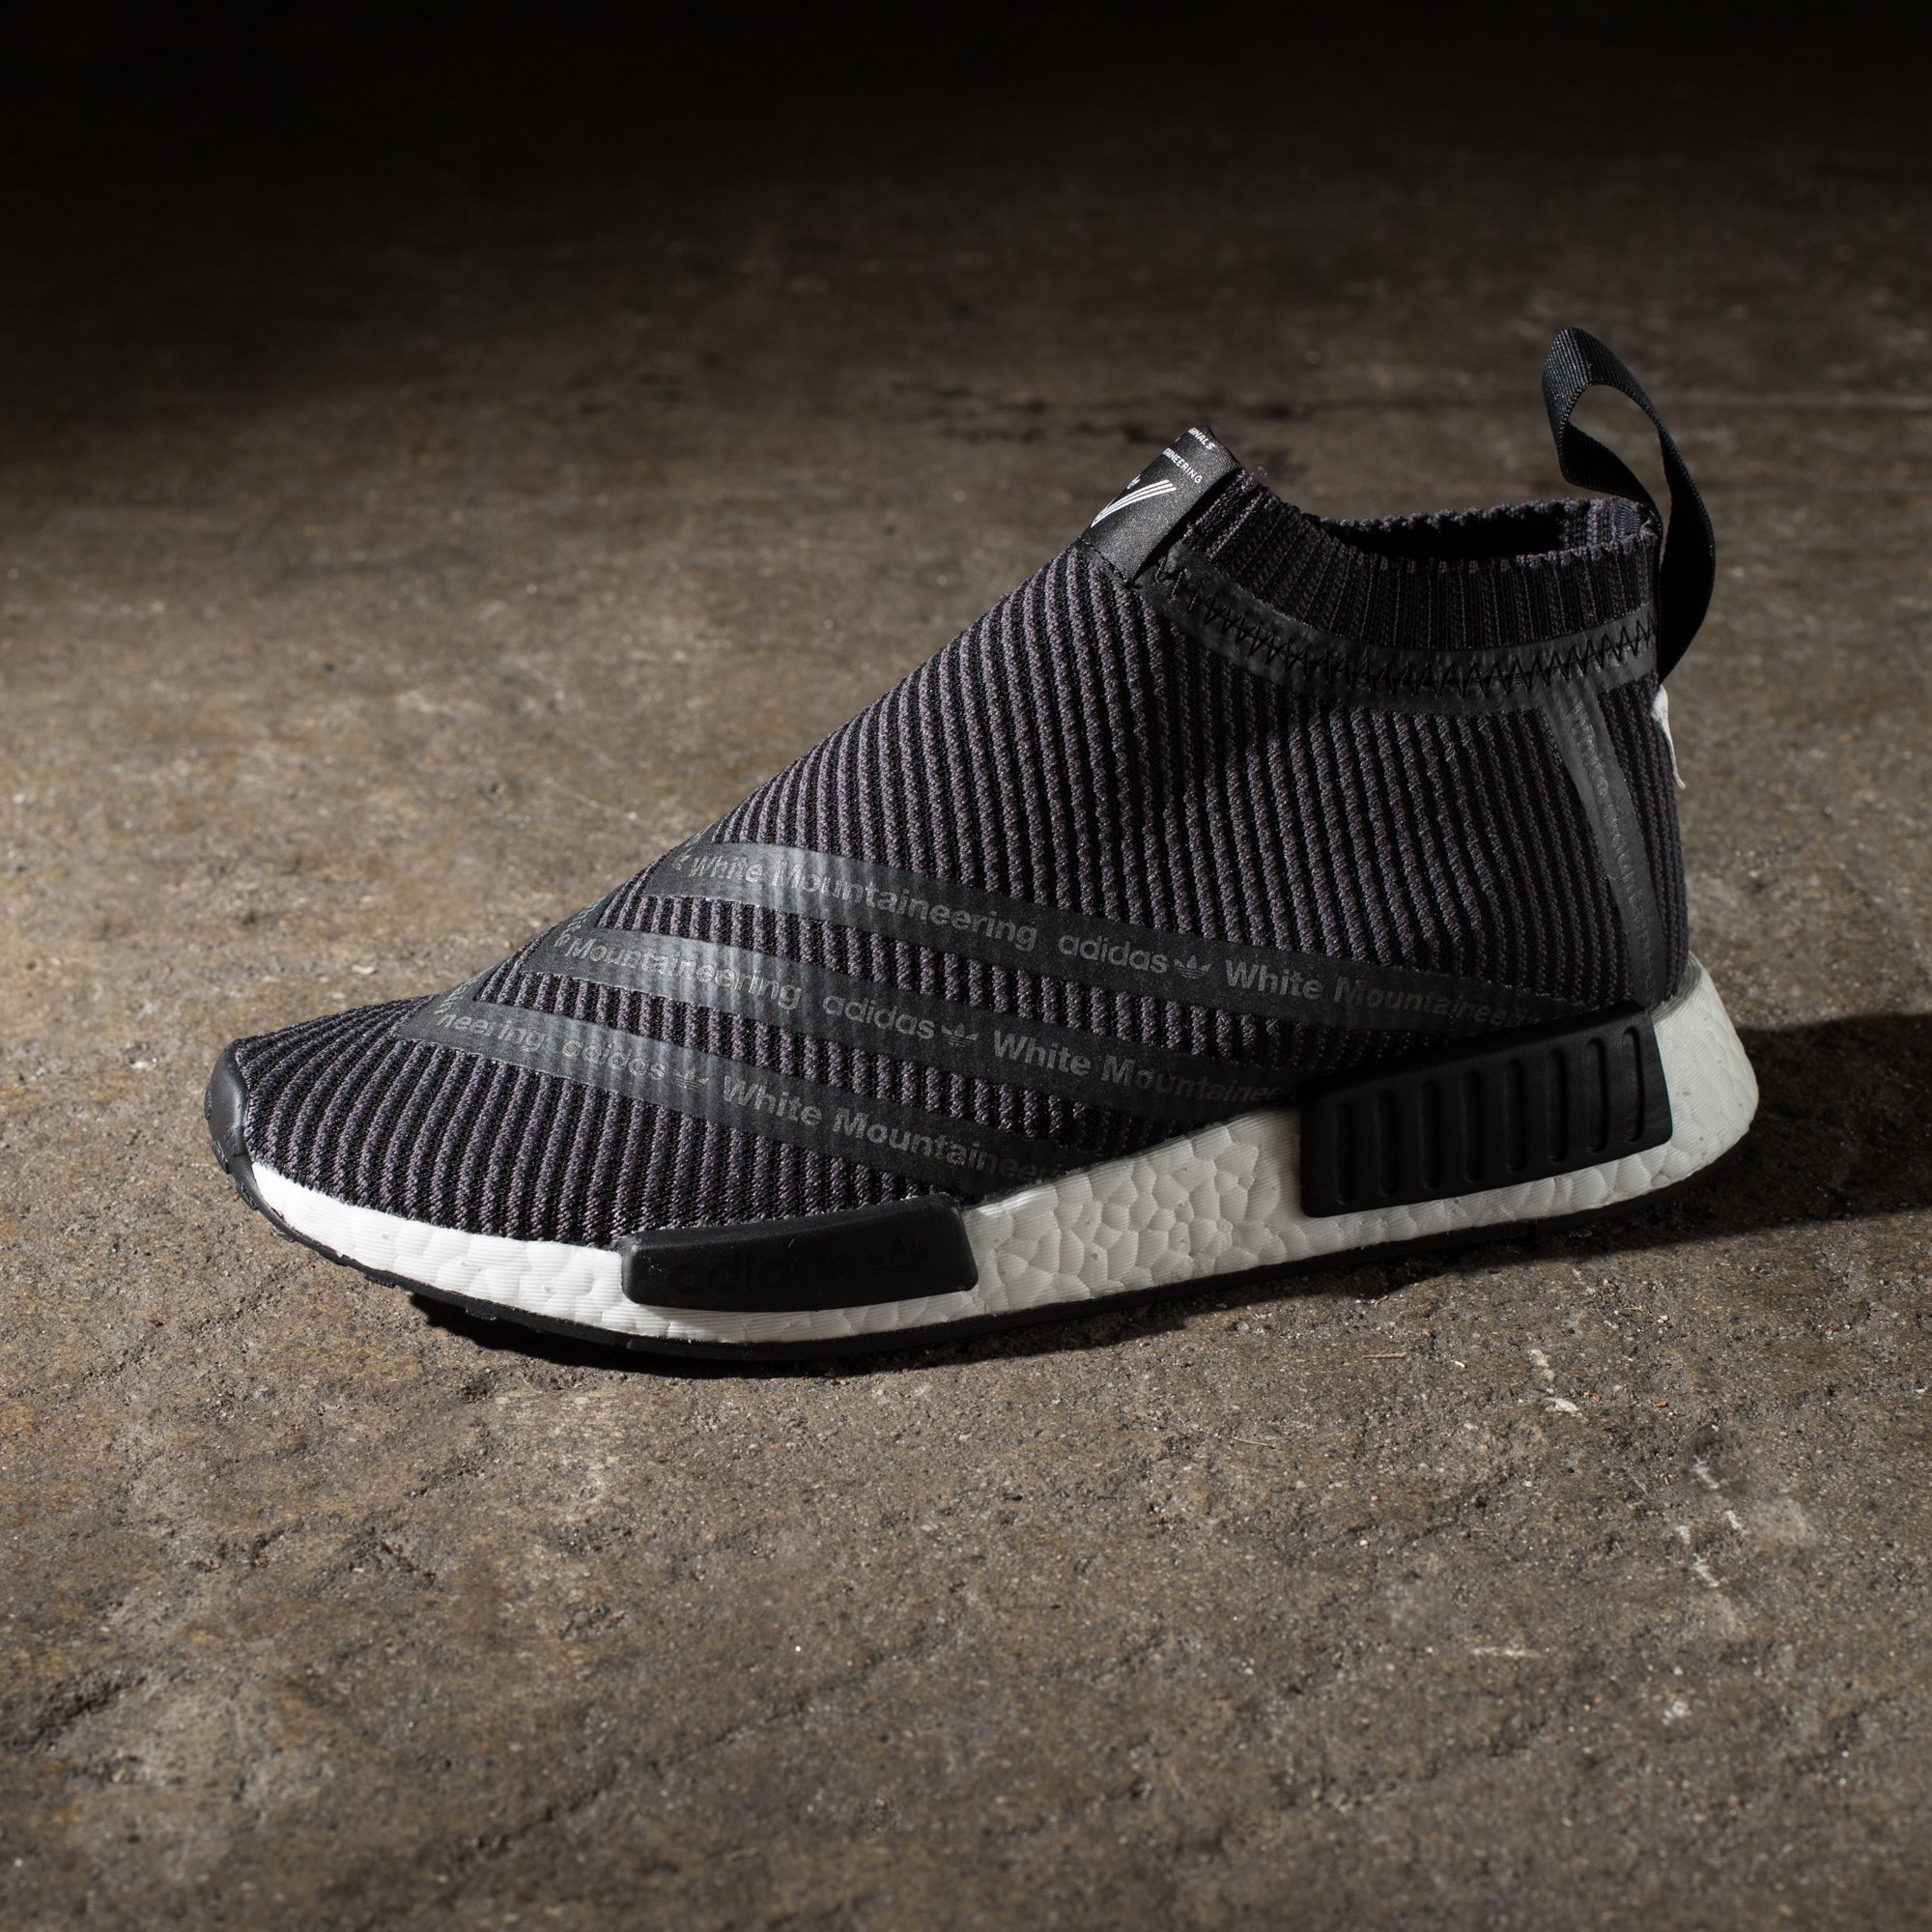 Accor Thanksgiving suspendere UNDEFEATED on X: "White Mountaineering x adidas NMD City Sock // Now  restocked at https://t.co/rPhV7ZxrNE https://t.co/HXQnBxDPLK" / X